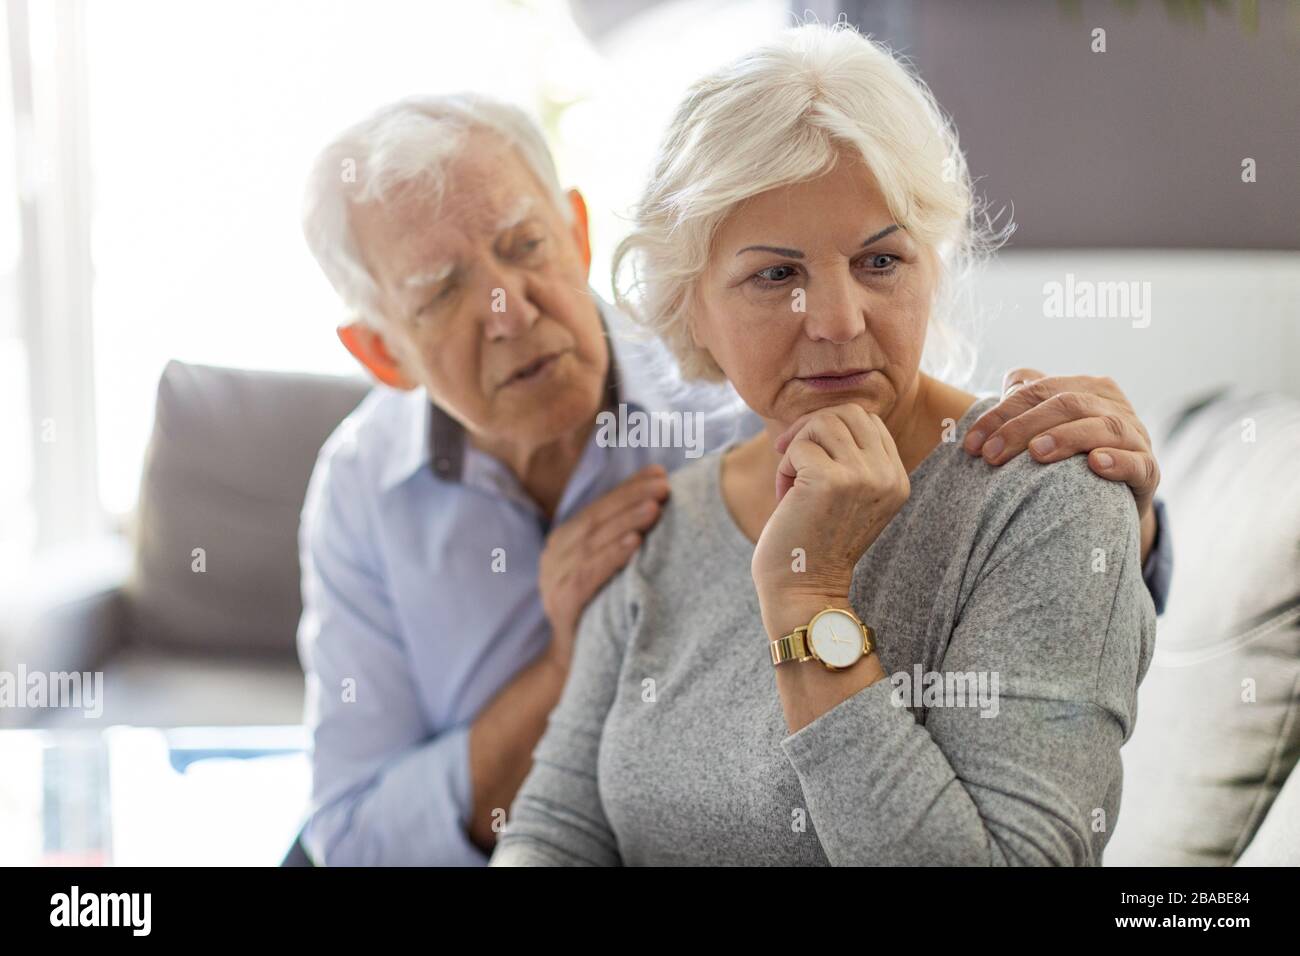 Senior man consoling his wife Stock Photo